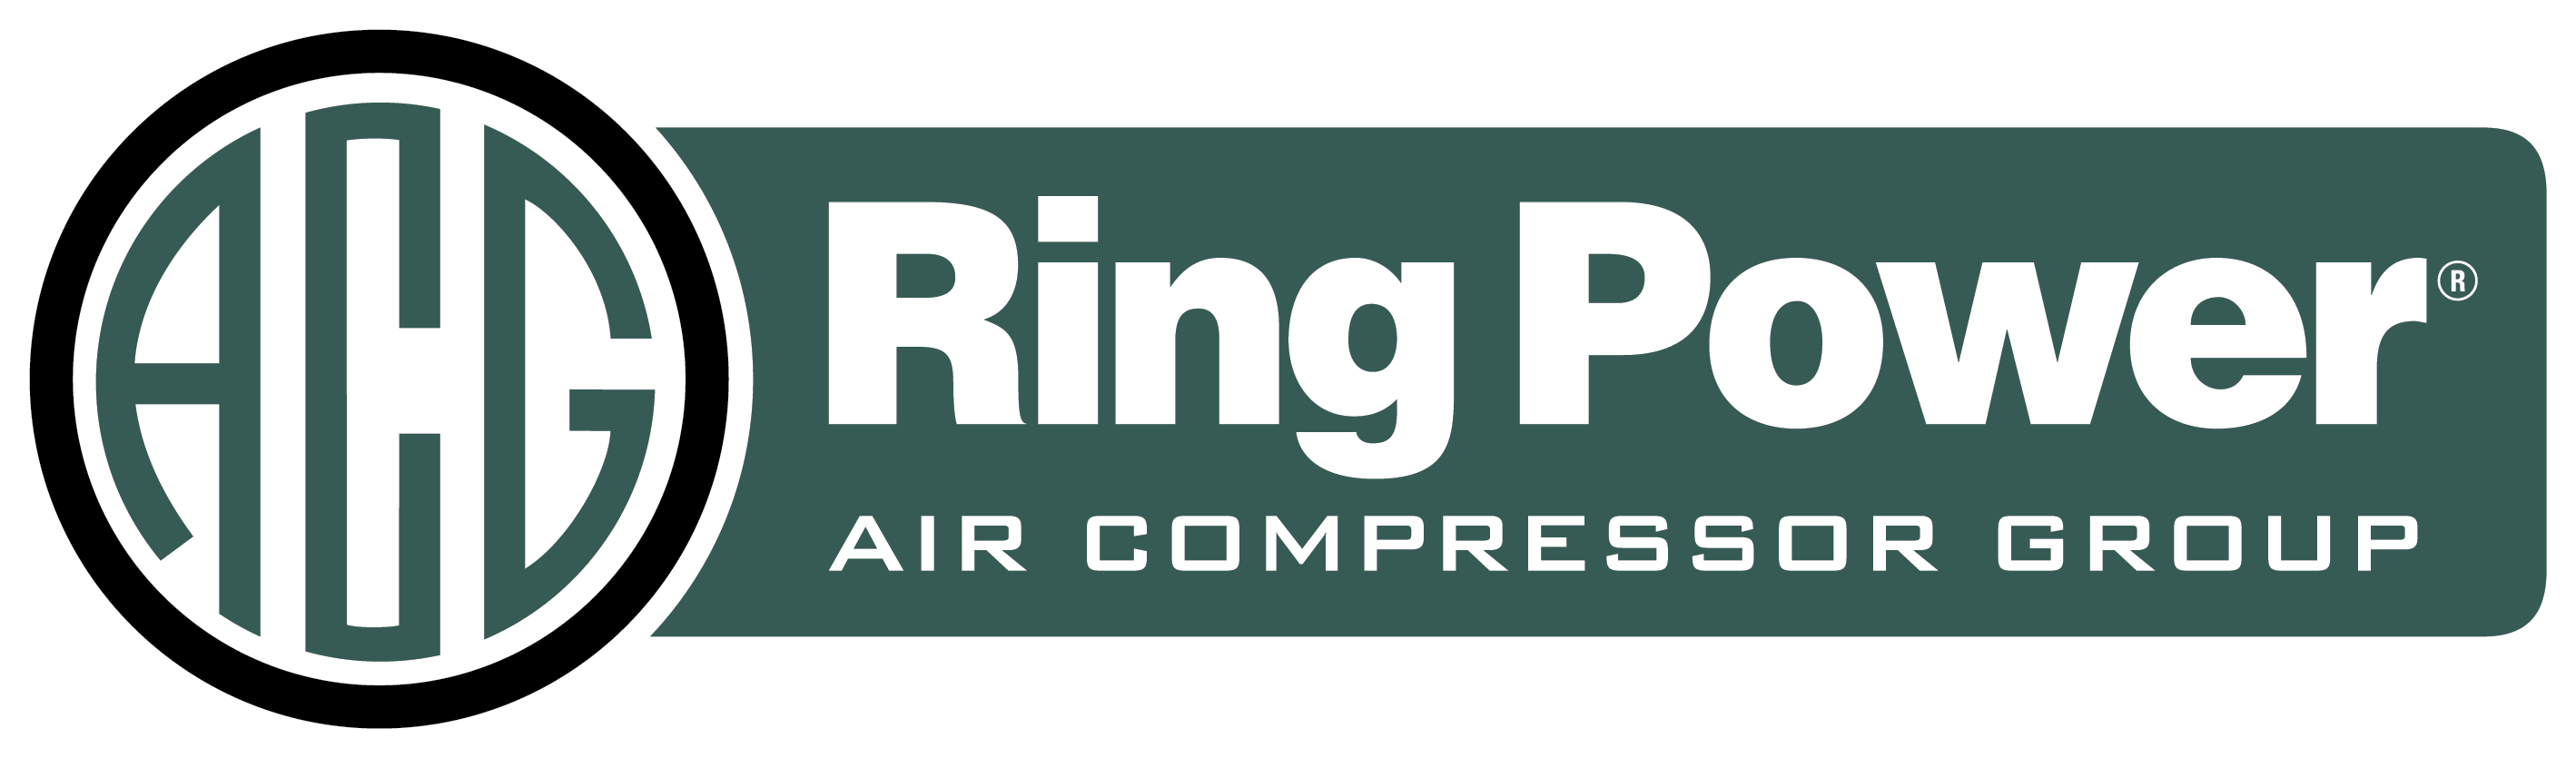 Ring Power Air Compressor Group